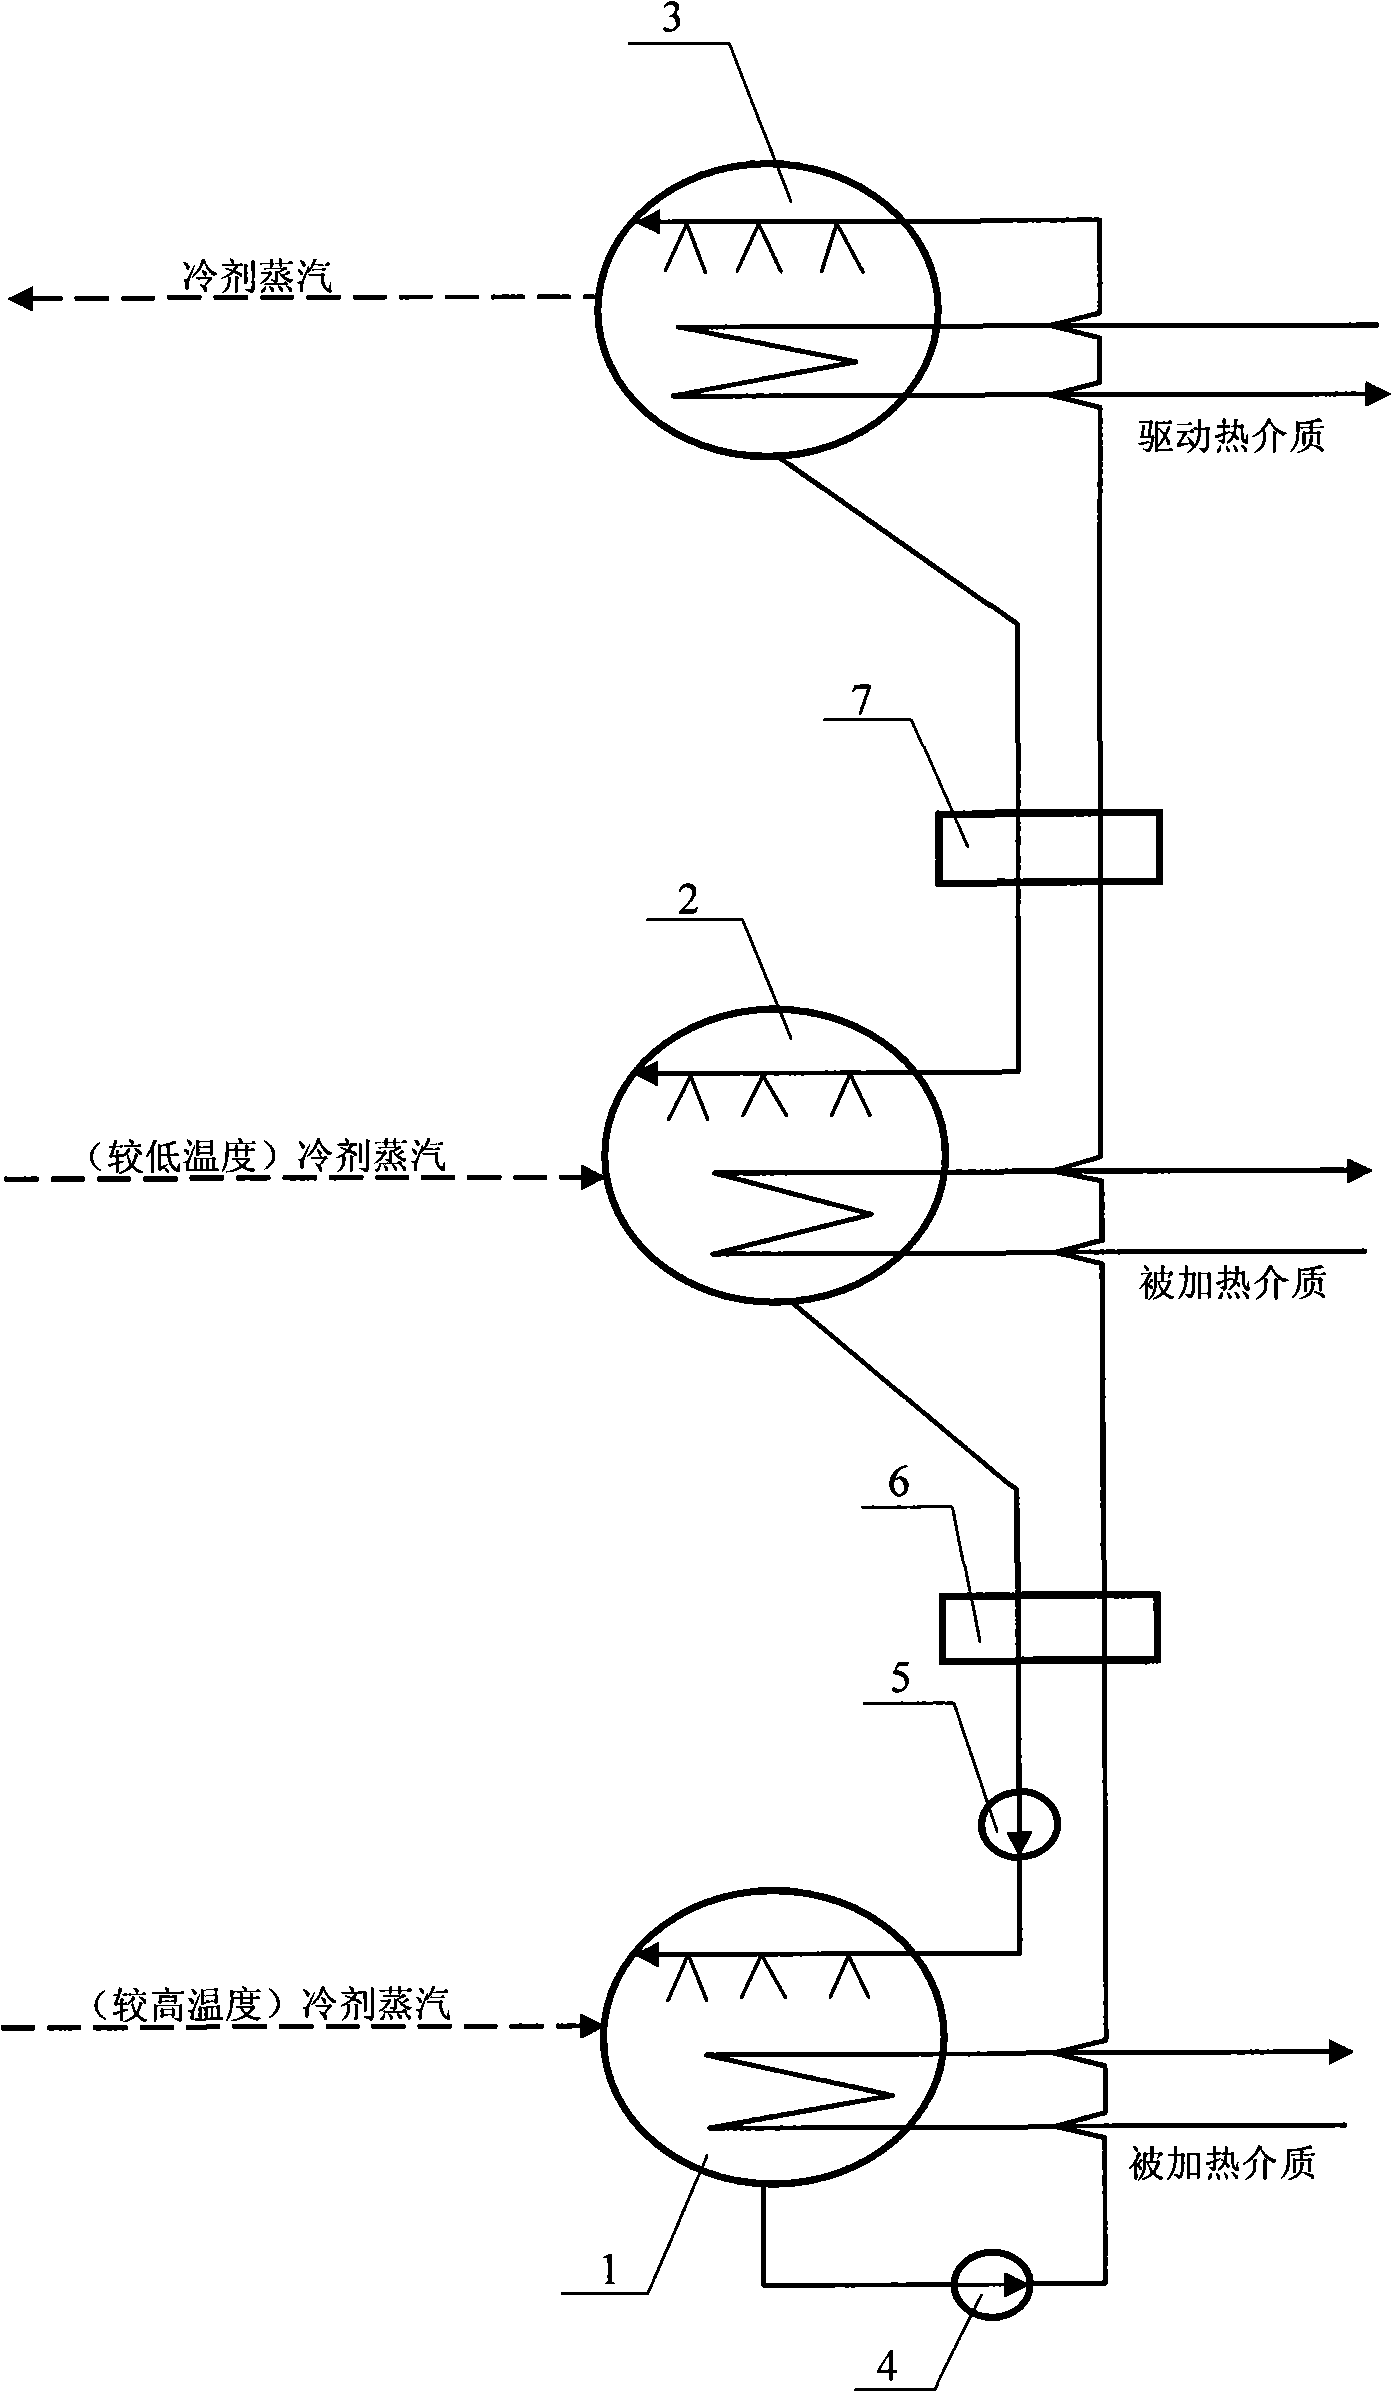 Generation-absorption-reabsorption system and absorption unit type based on system